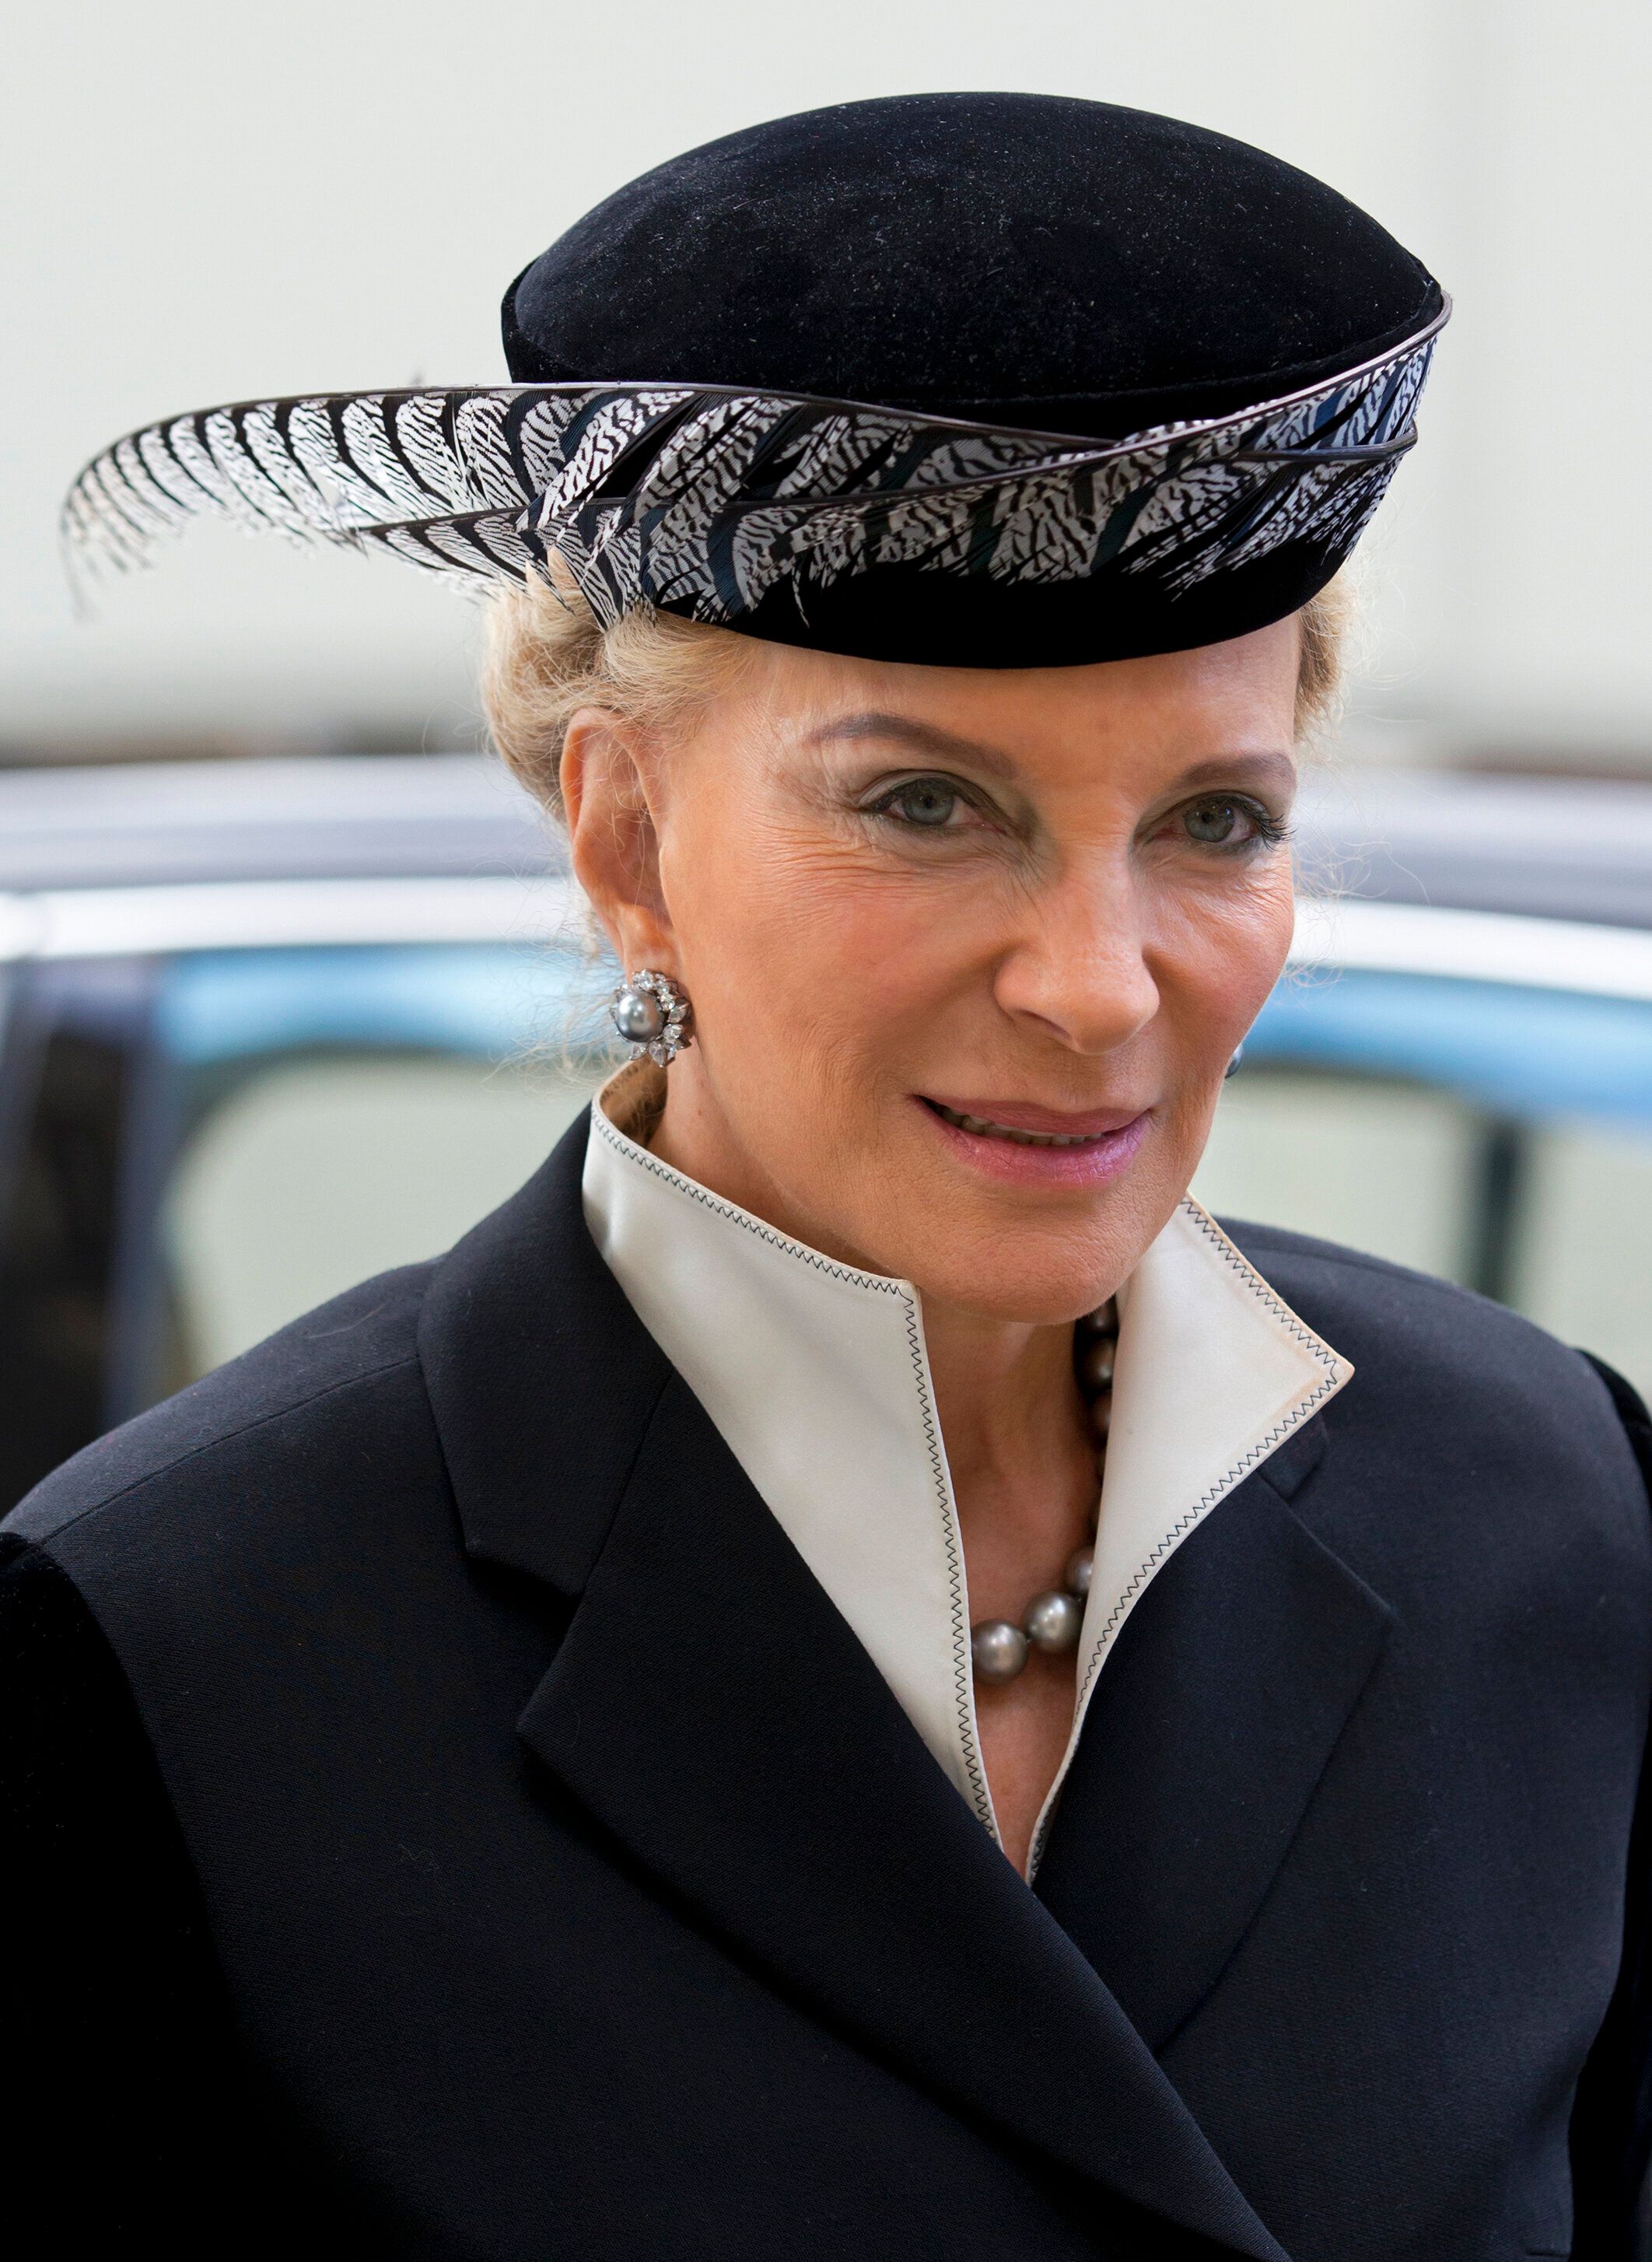 Princess Michael of Kent attends a memorial service for Alistair Vane-Tempest-Stewart, 9th Marquess of Londonderry on October